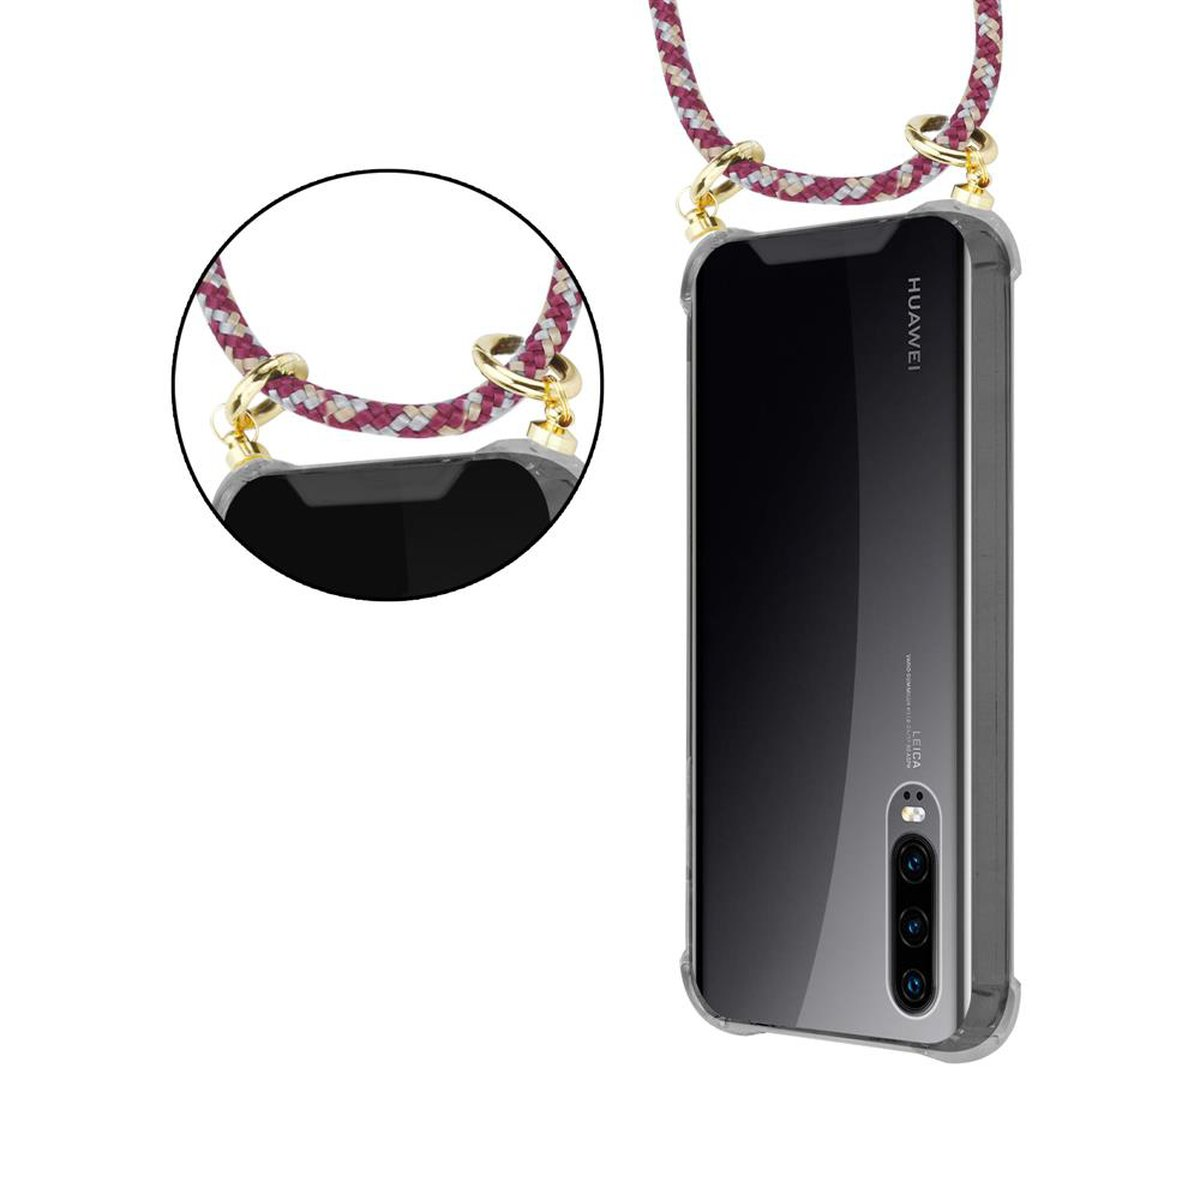 WEIß Kette Band Backcover, Ringen, und Kordel Gold Handy mit Hülle, abnehmbarer P30, Huawei, ROT GELB CADORABO